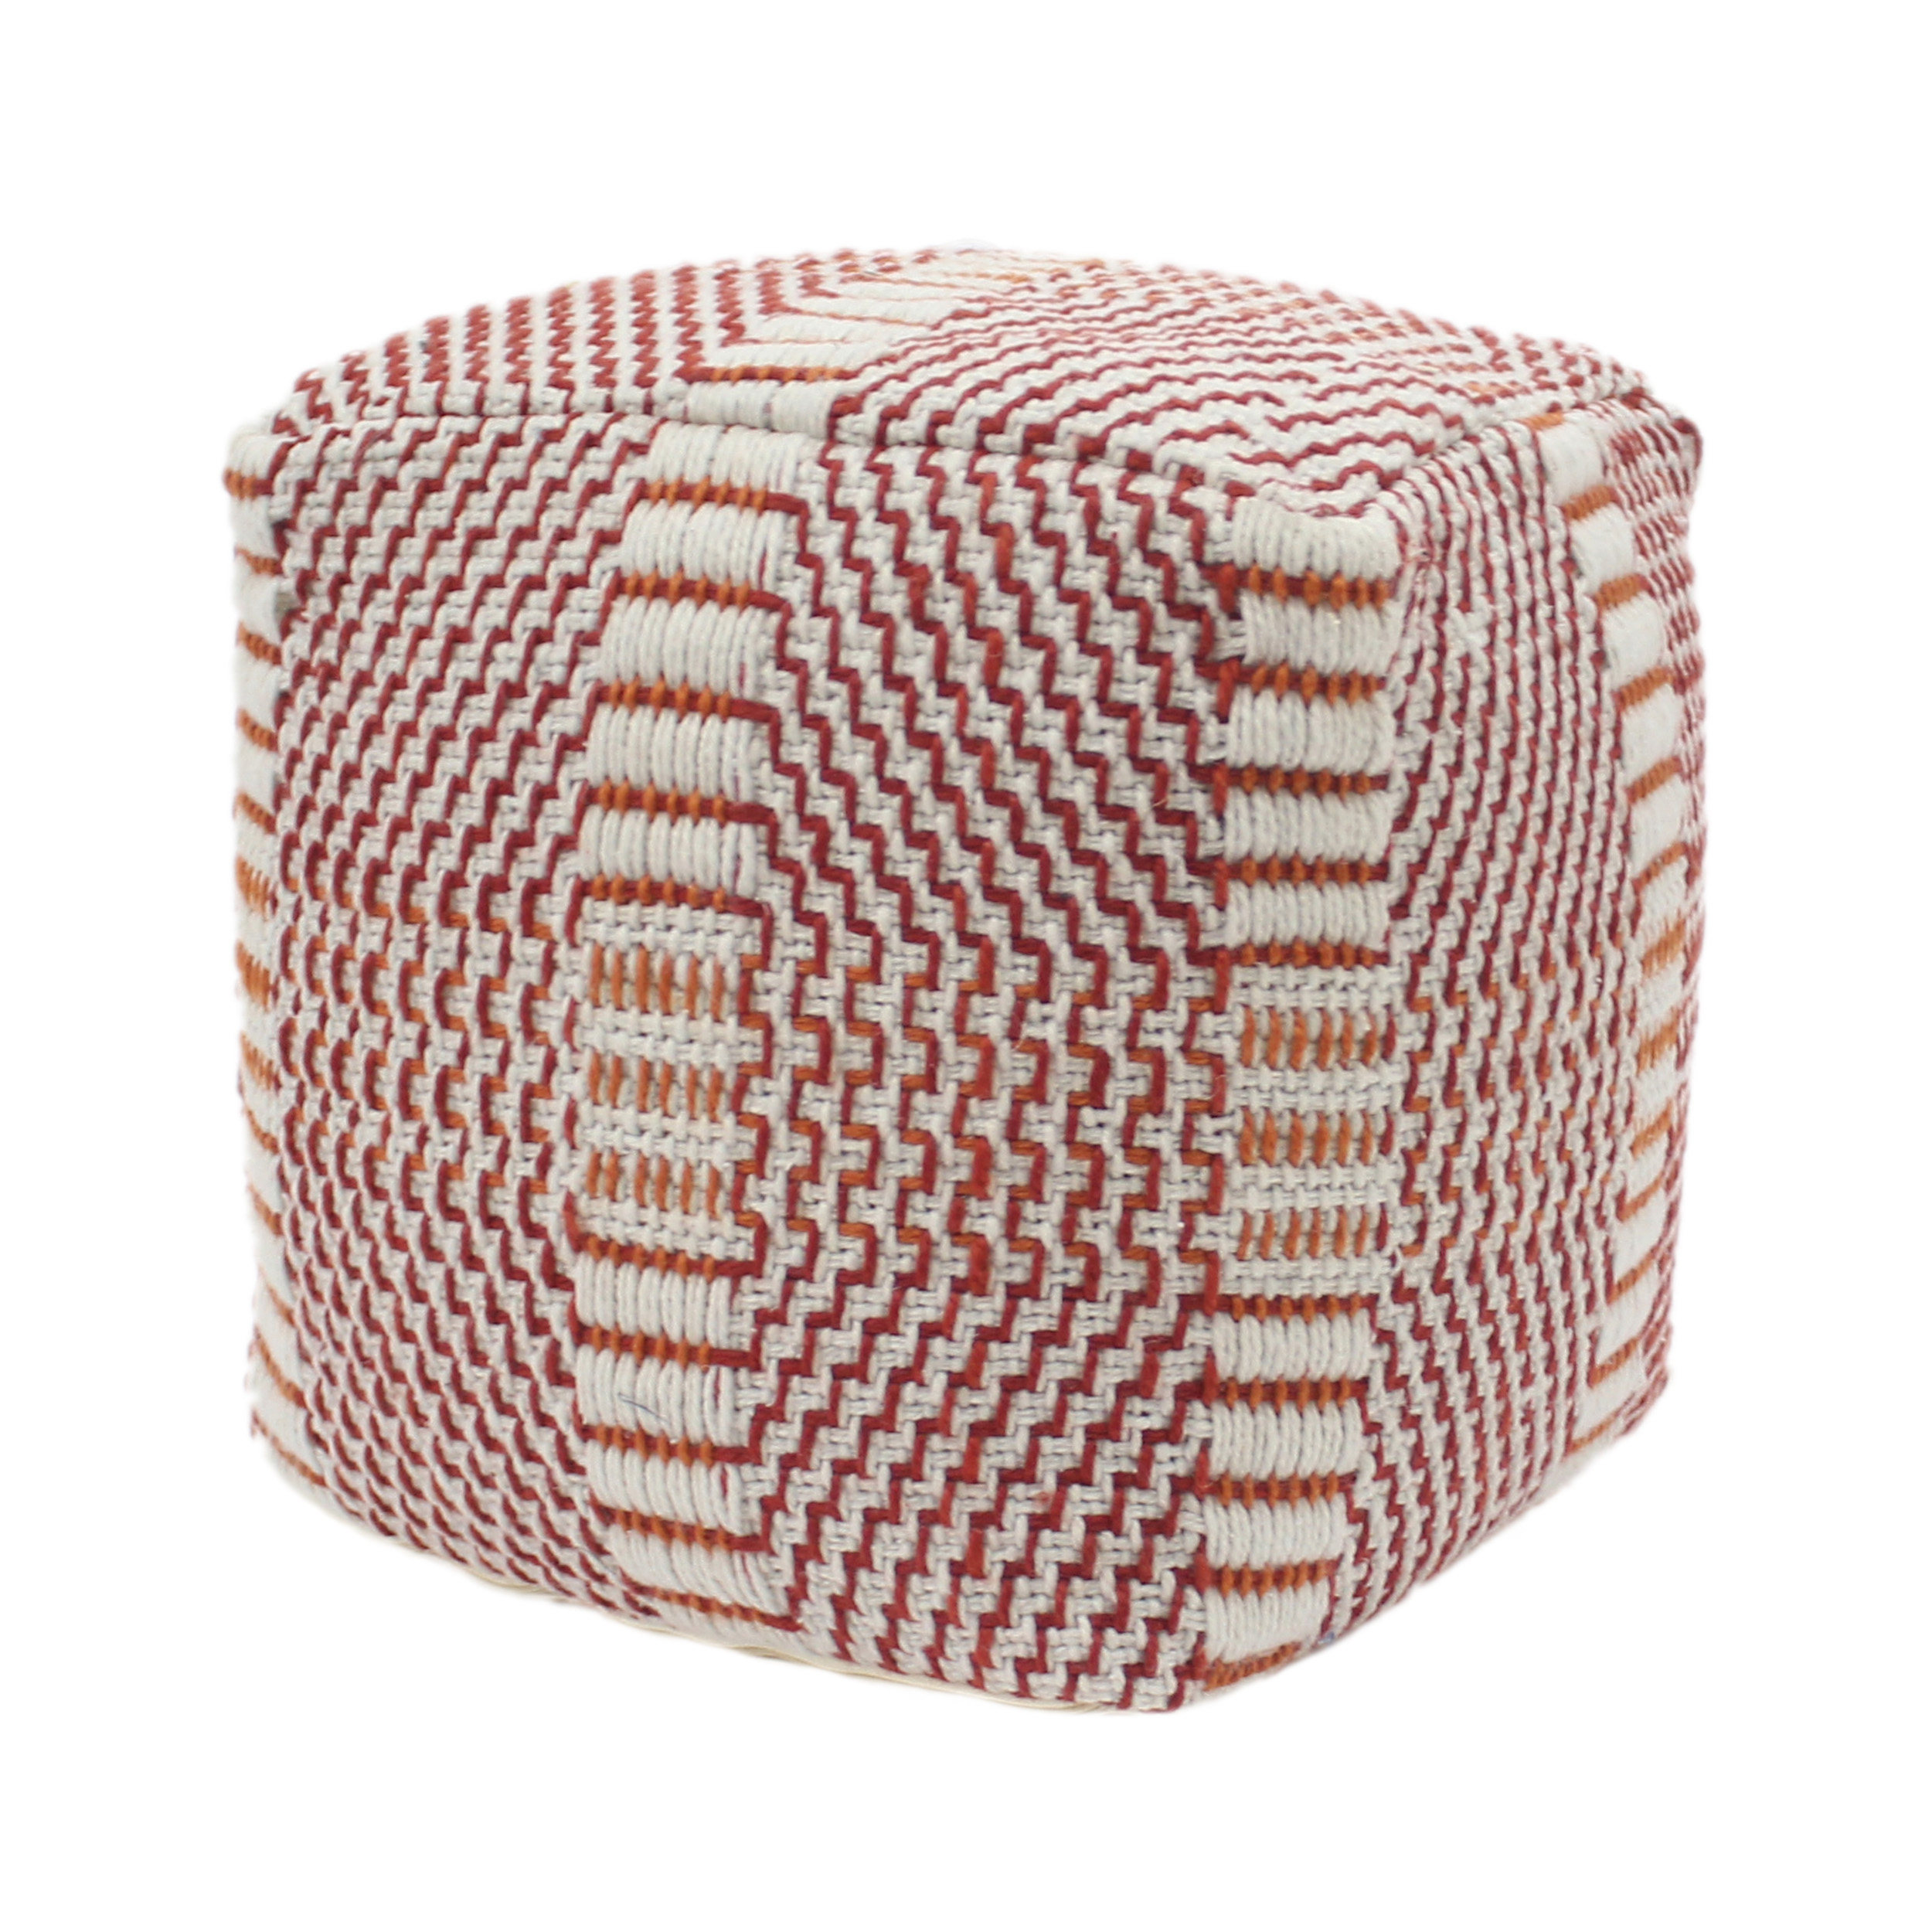 Dexter Bay Outdoor Handcrafted Boho Water Resistant Cube Pouf, Red and Orange - image 1 of 5